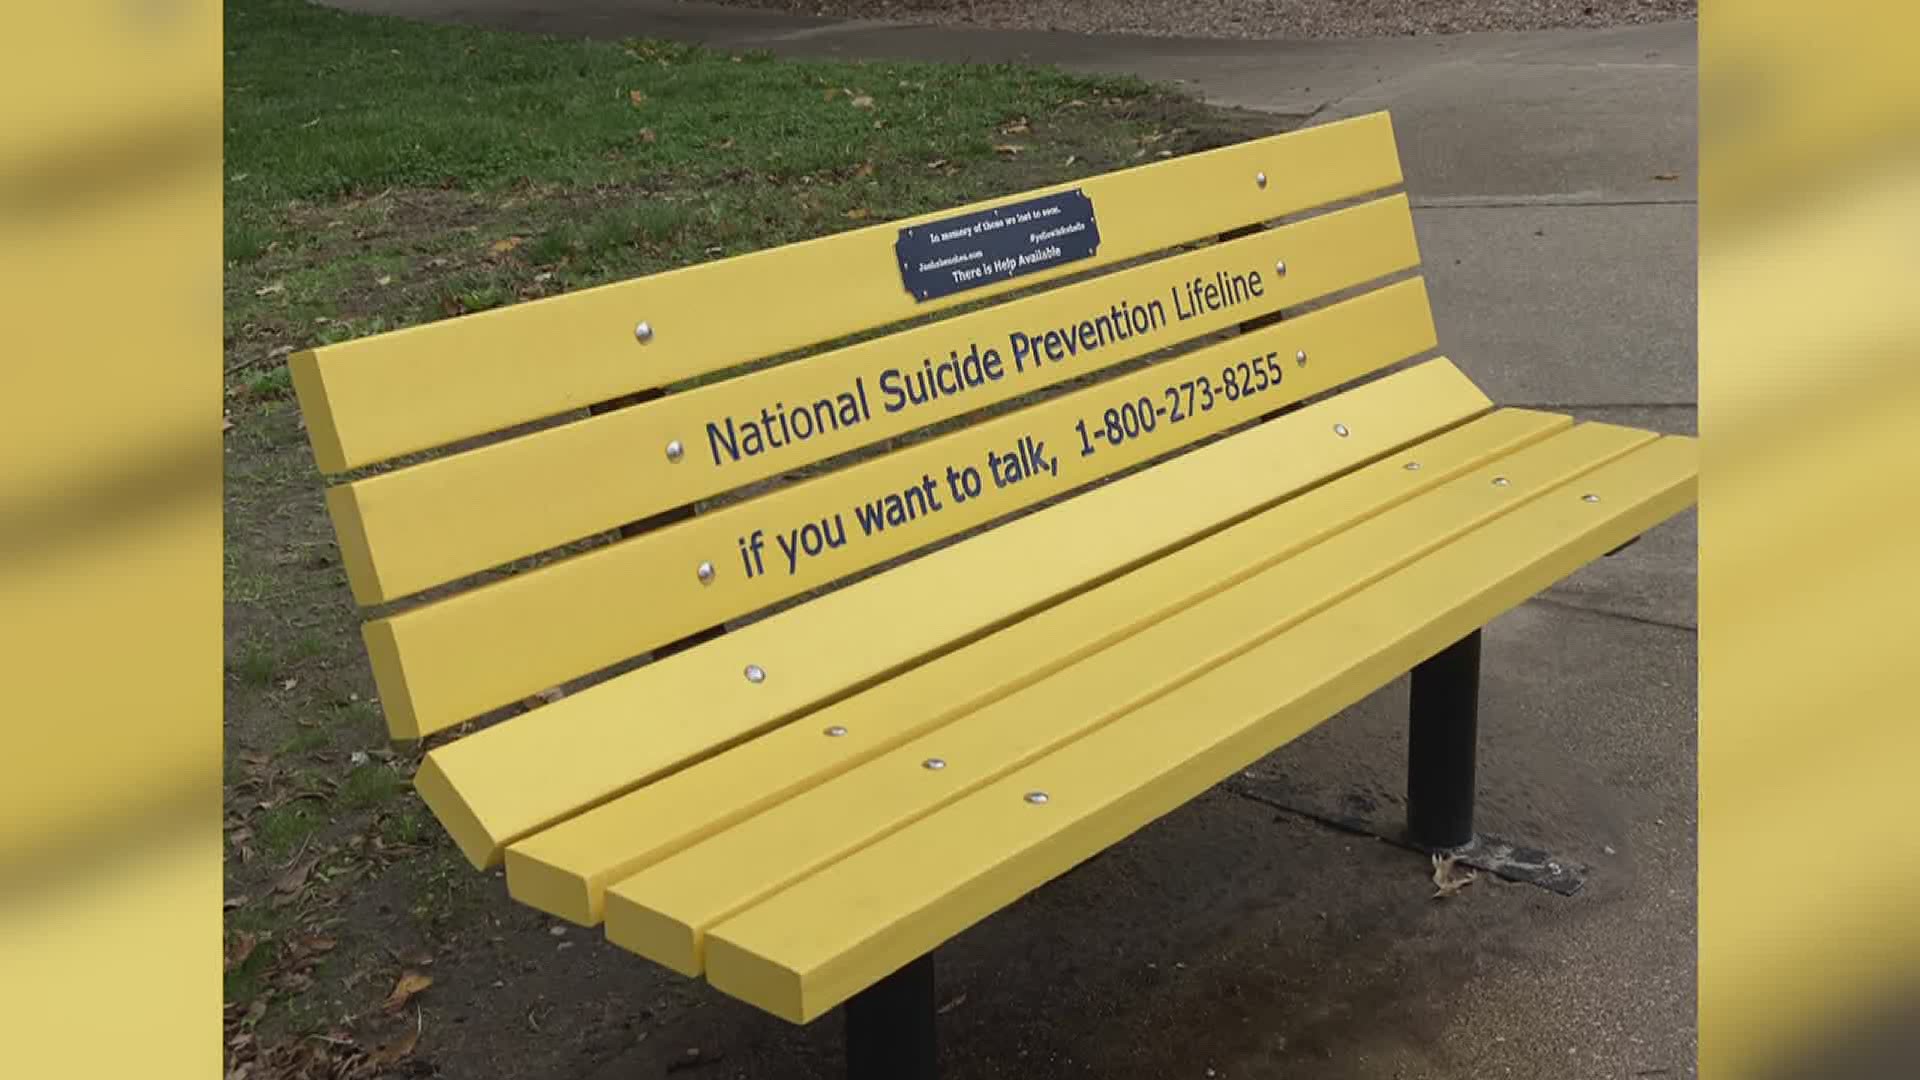 The yellow bench was installed in upper Longview Park and includes a National Suicide Prevention Lifeline phone number and message.